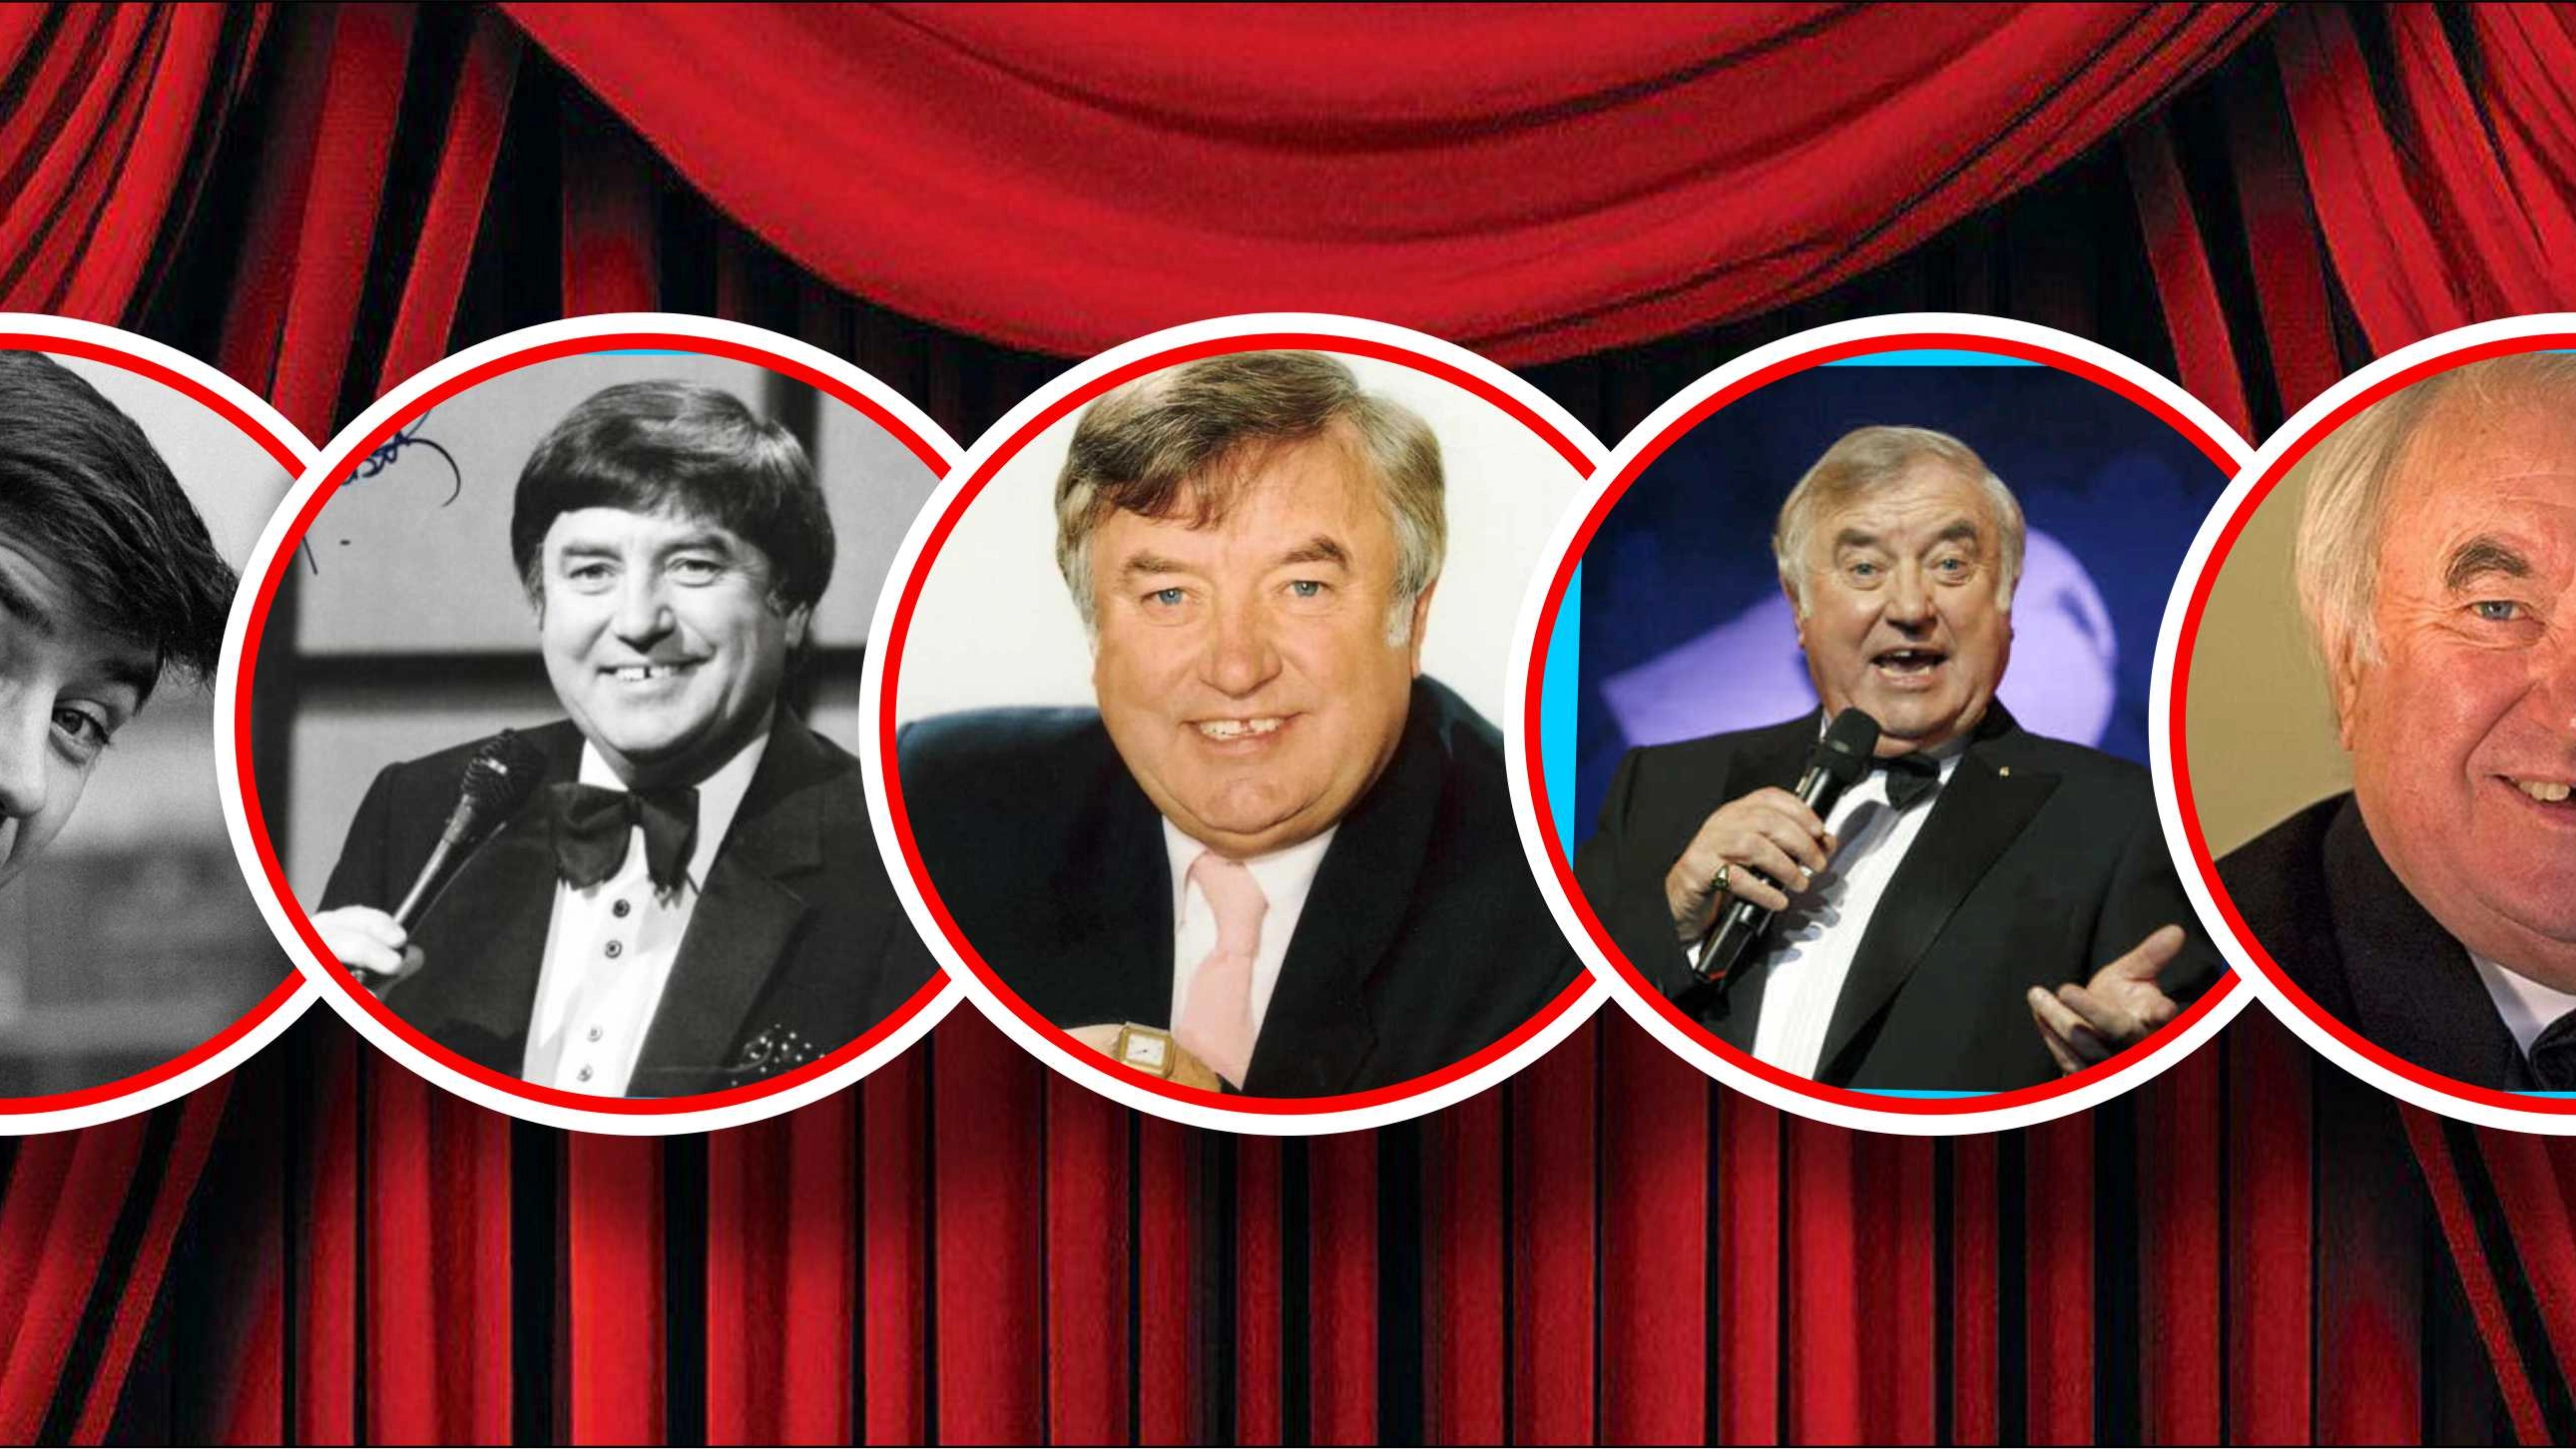 An afternoon with Jimmy Tarbuck